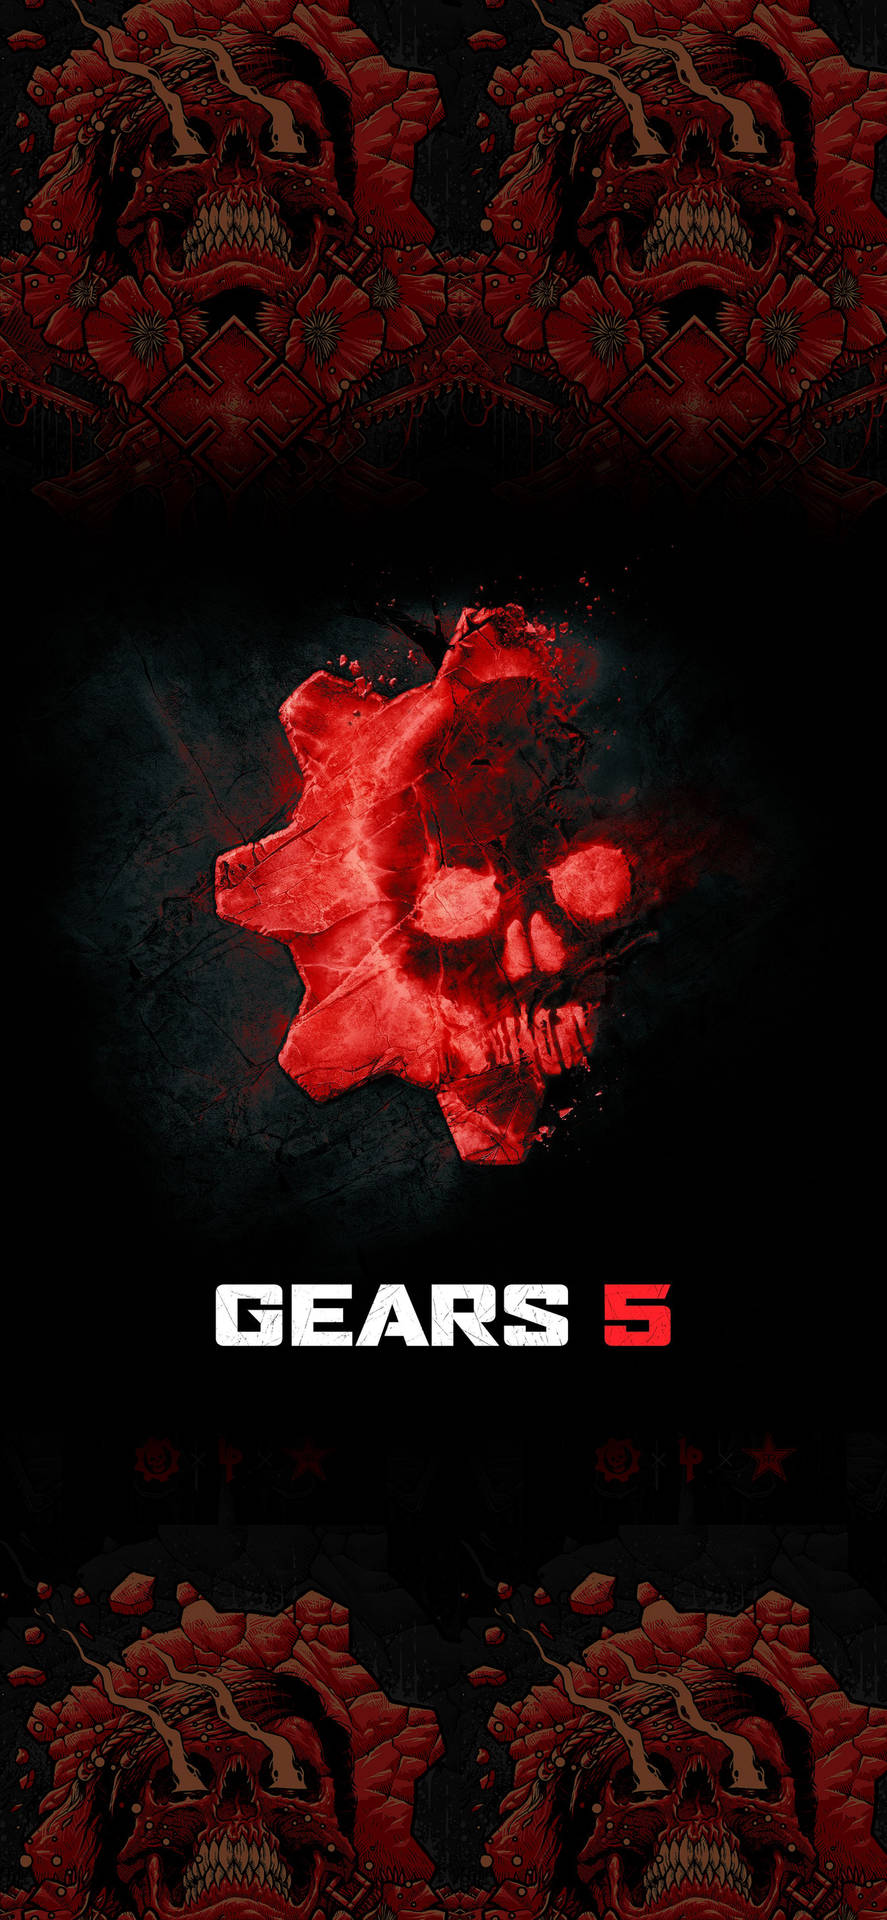 Cog And Skull On Fire Gears 5 Iphone Background